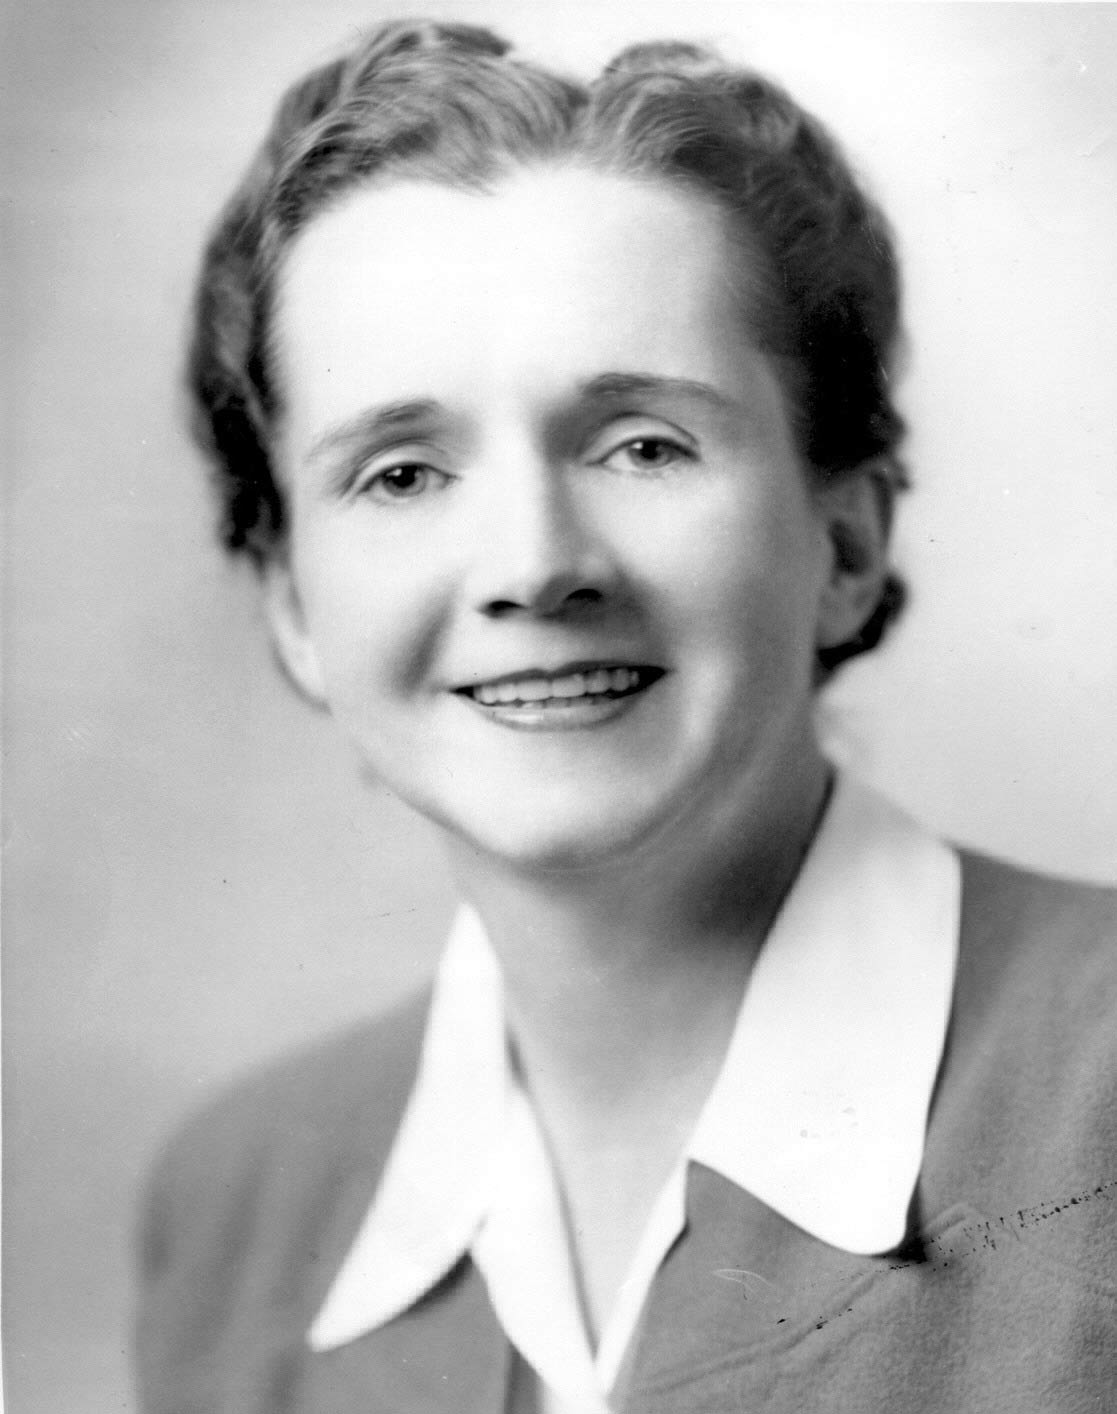 Rachel Carson around the time she wrote Silent Spring, which kicked off the modern-day environmental movement.